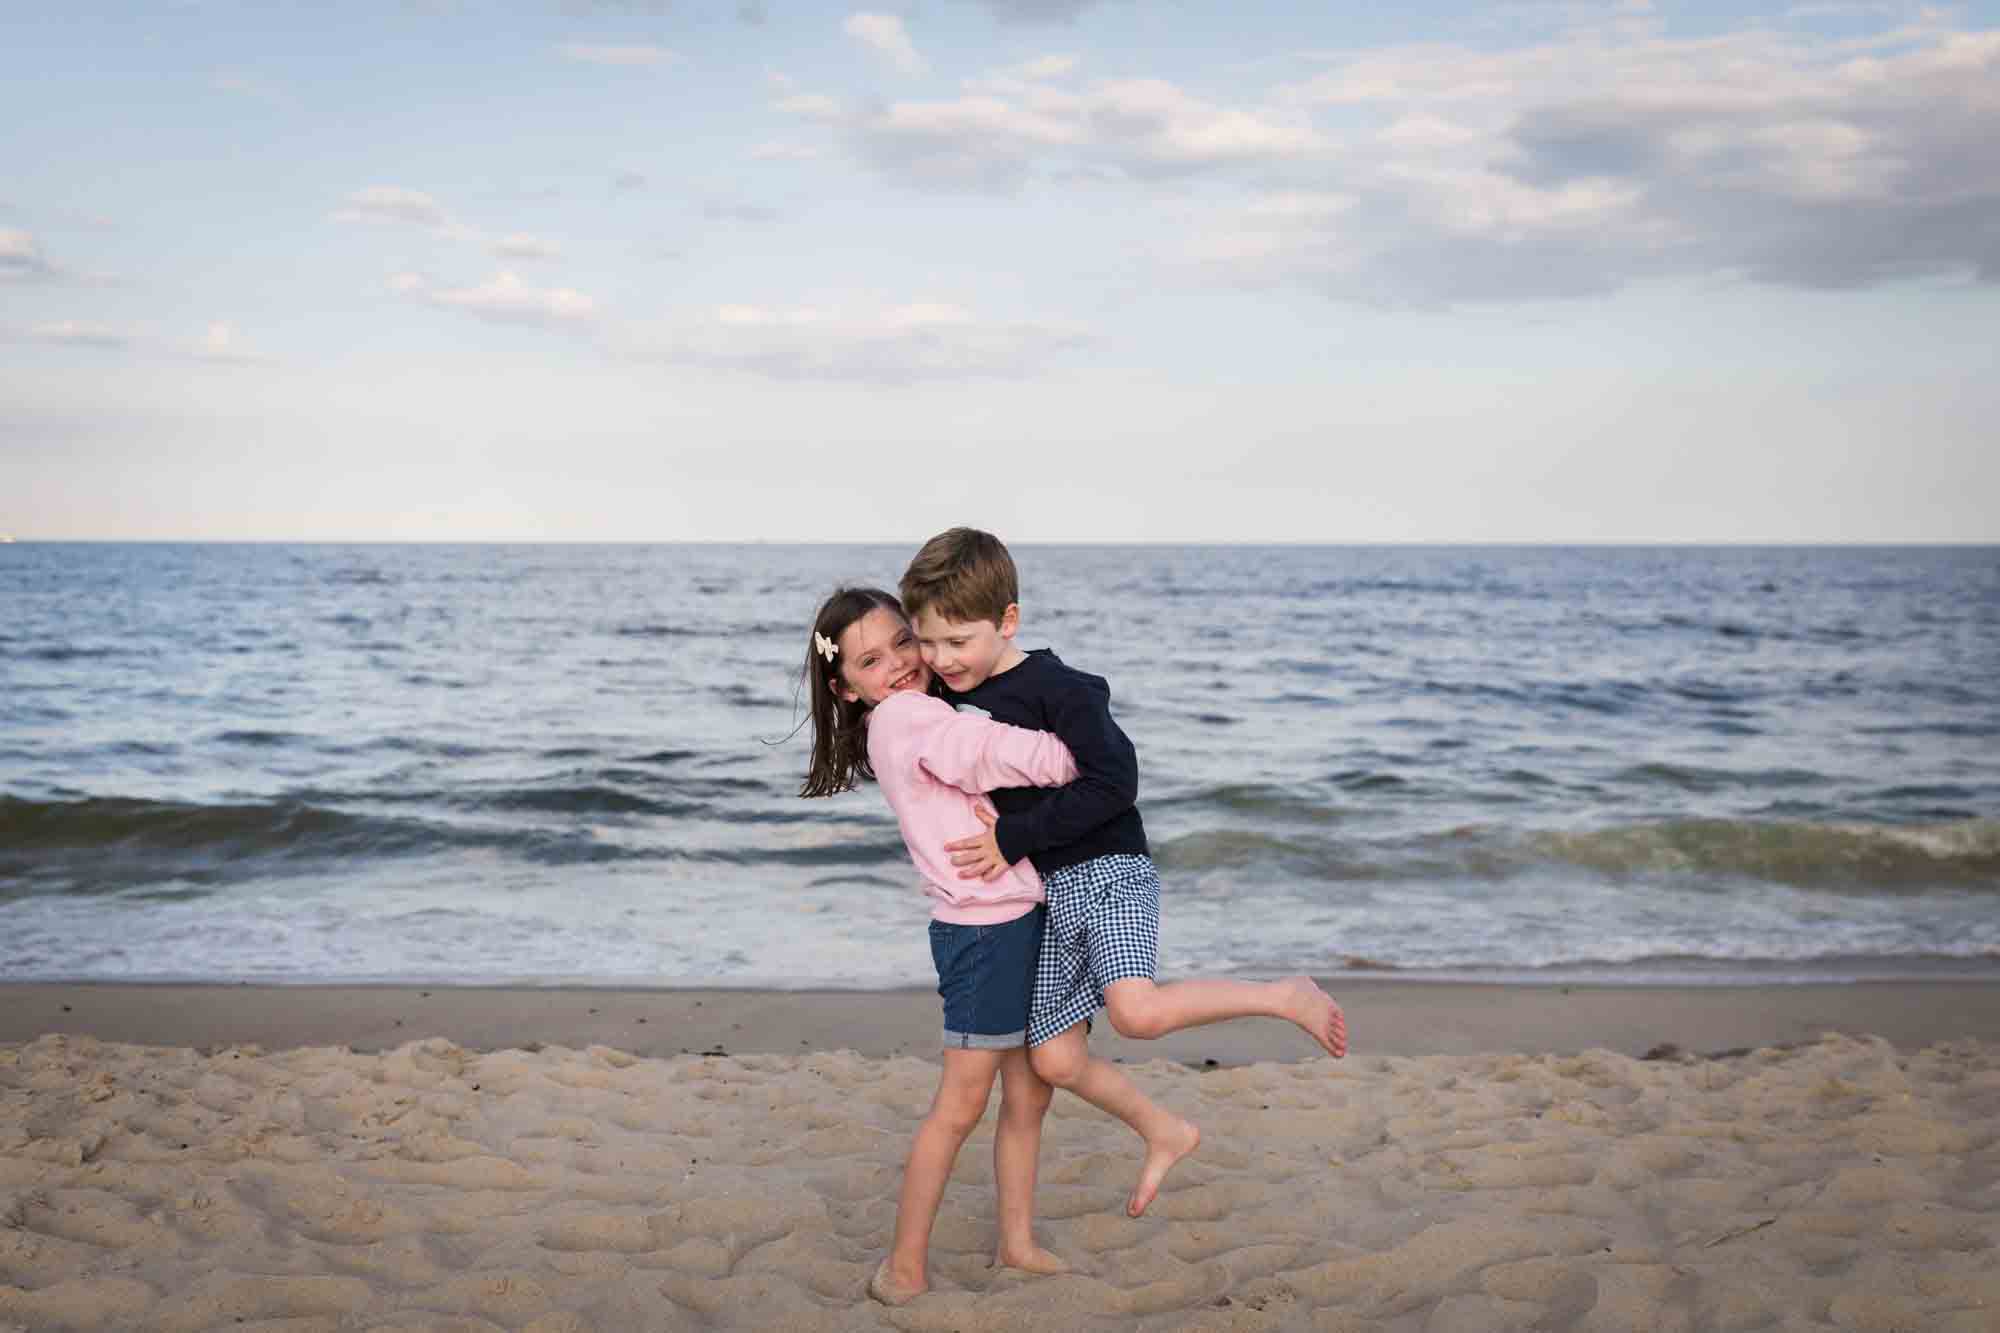 Little girl lifting up little boy on beach in front of ocean